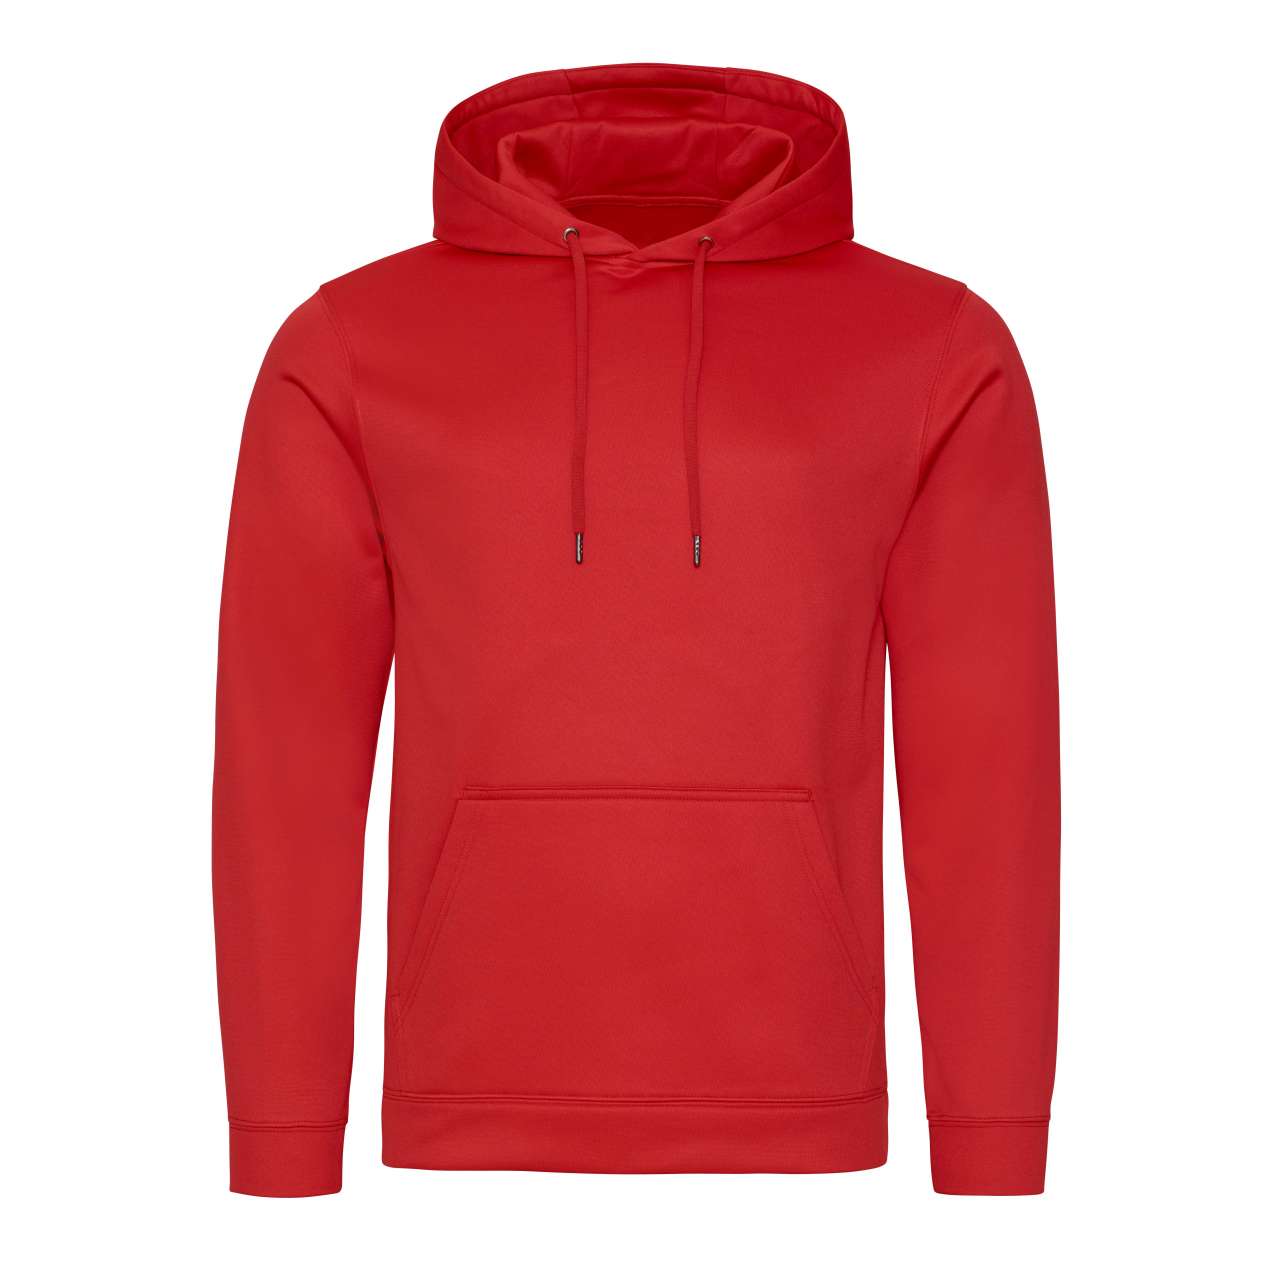 Promo  SPORTS POLYESTER HOODIE